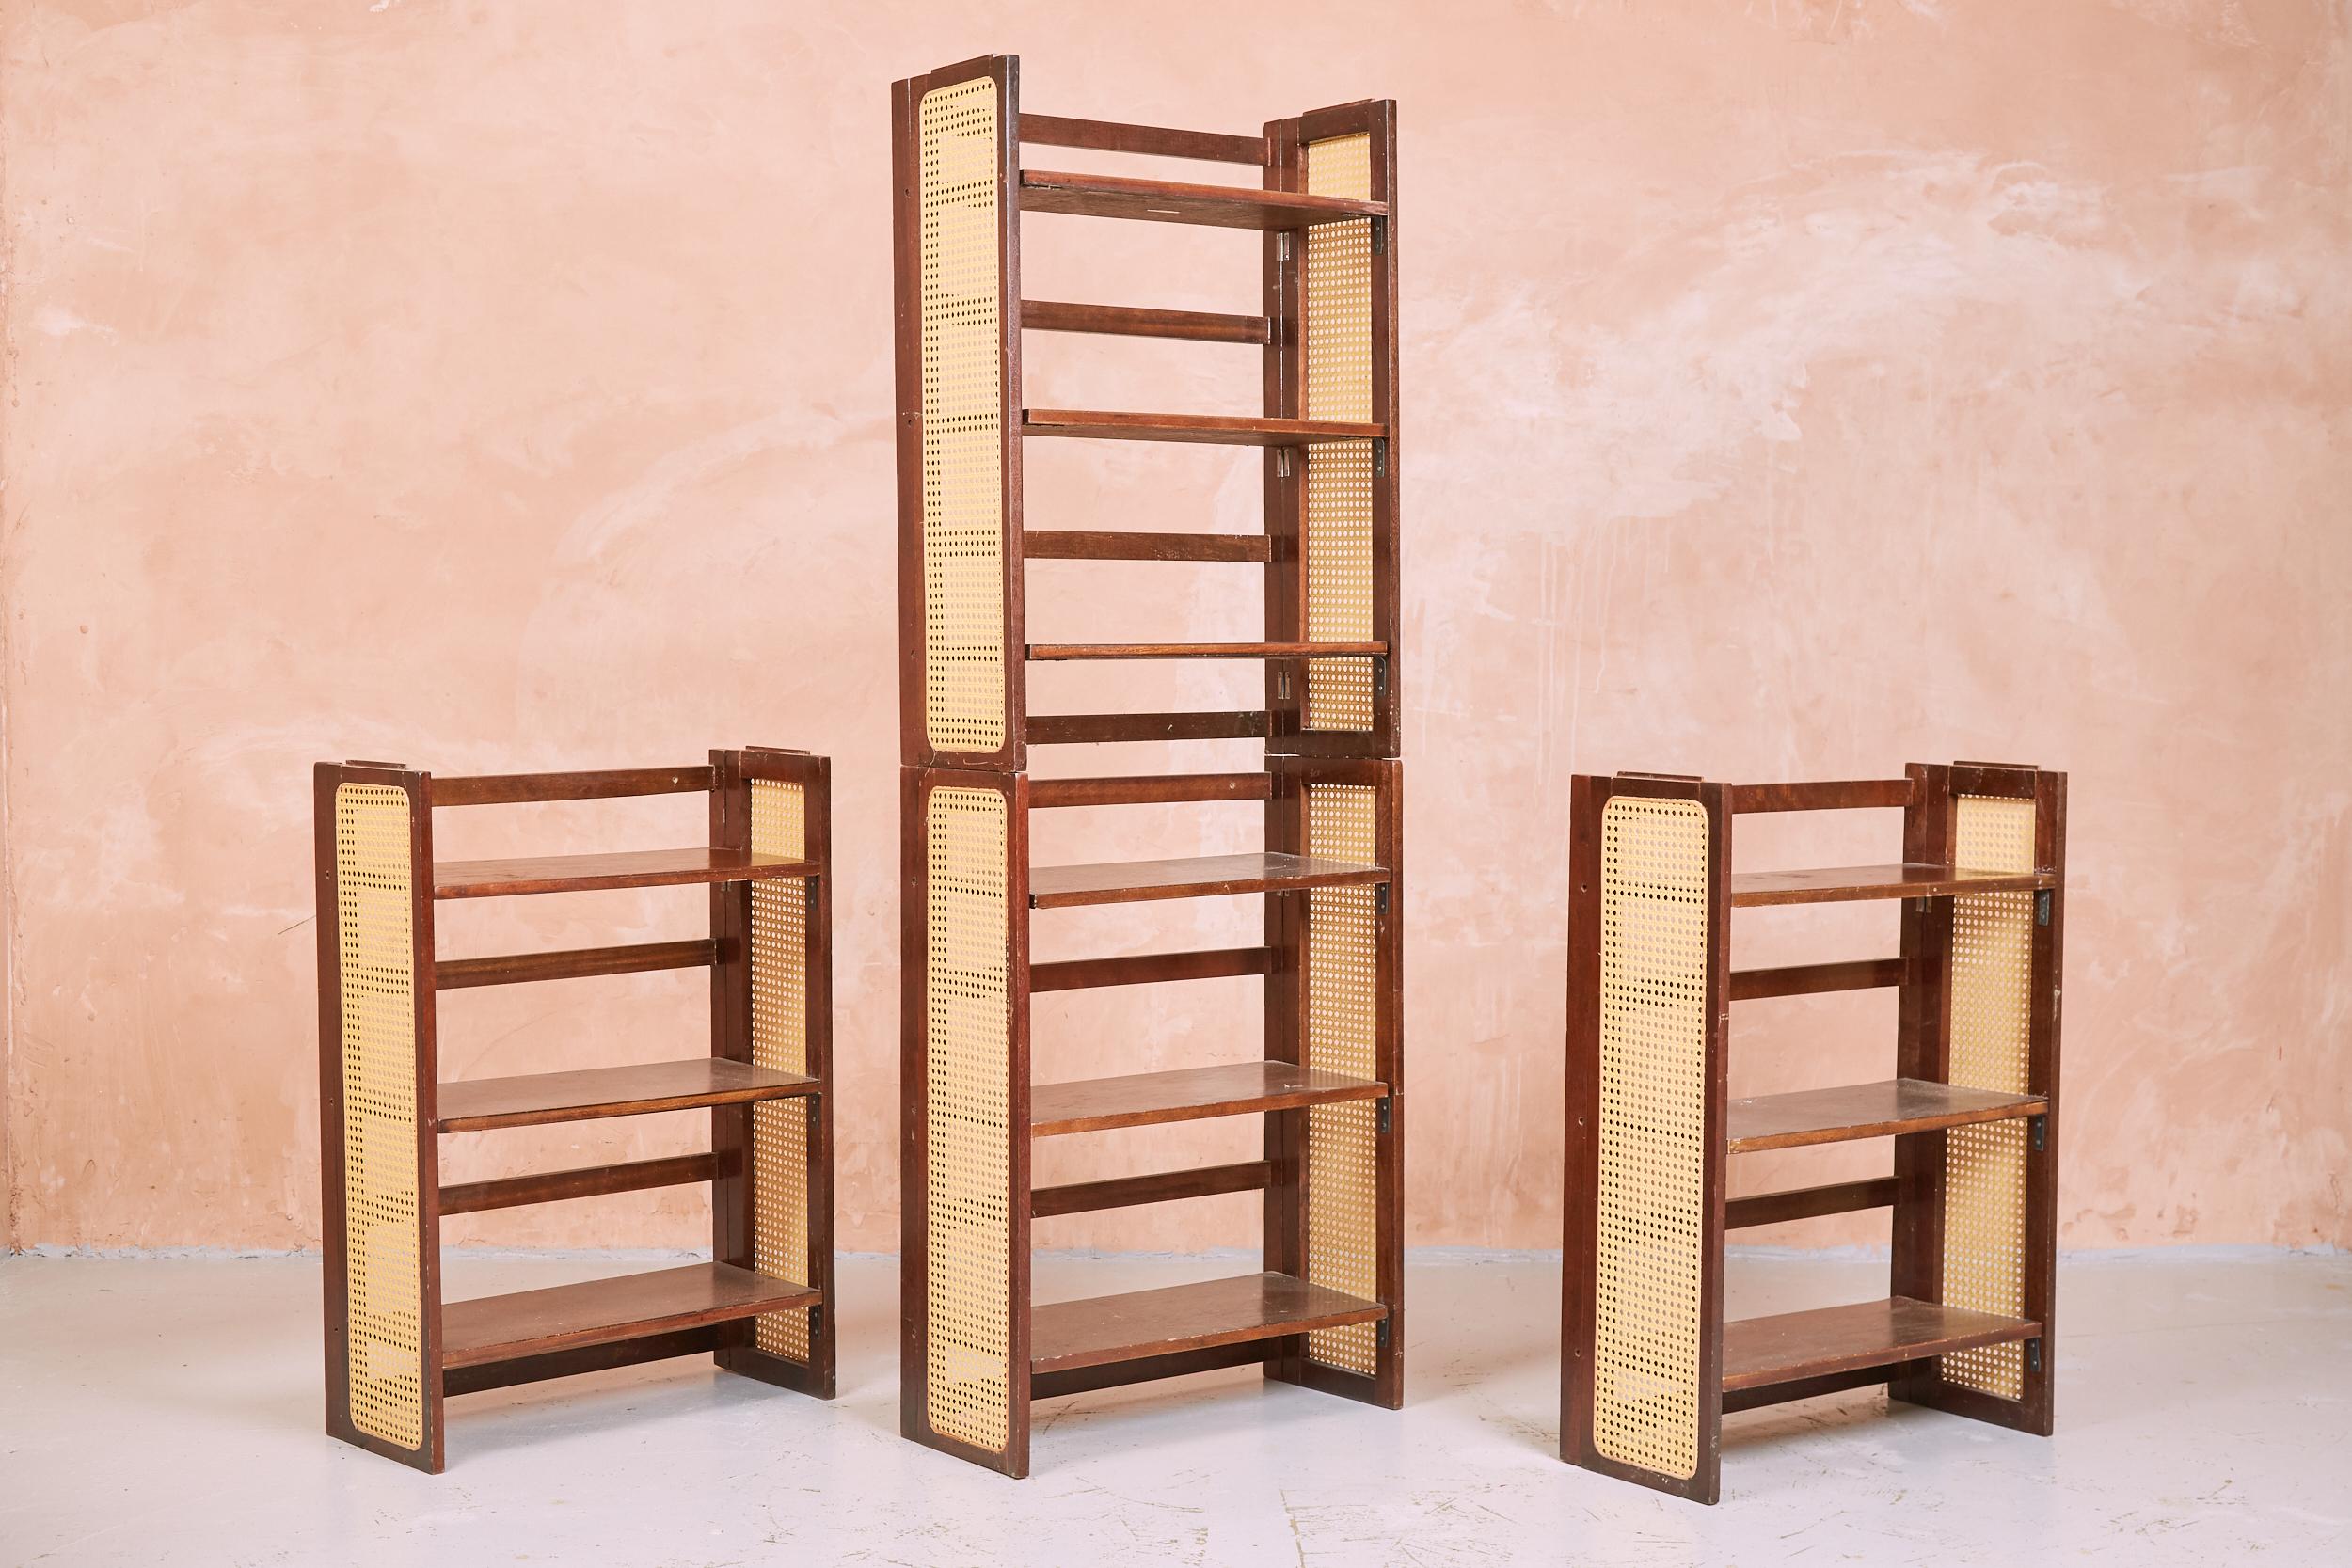 A set of vintage stackable mahogany shelves with cane sides.
These are priced individually and we have two units available as pictured so please let us know how many you would like.
Very versatile as they are free standing, suitable to be used